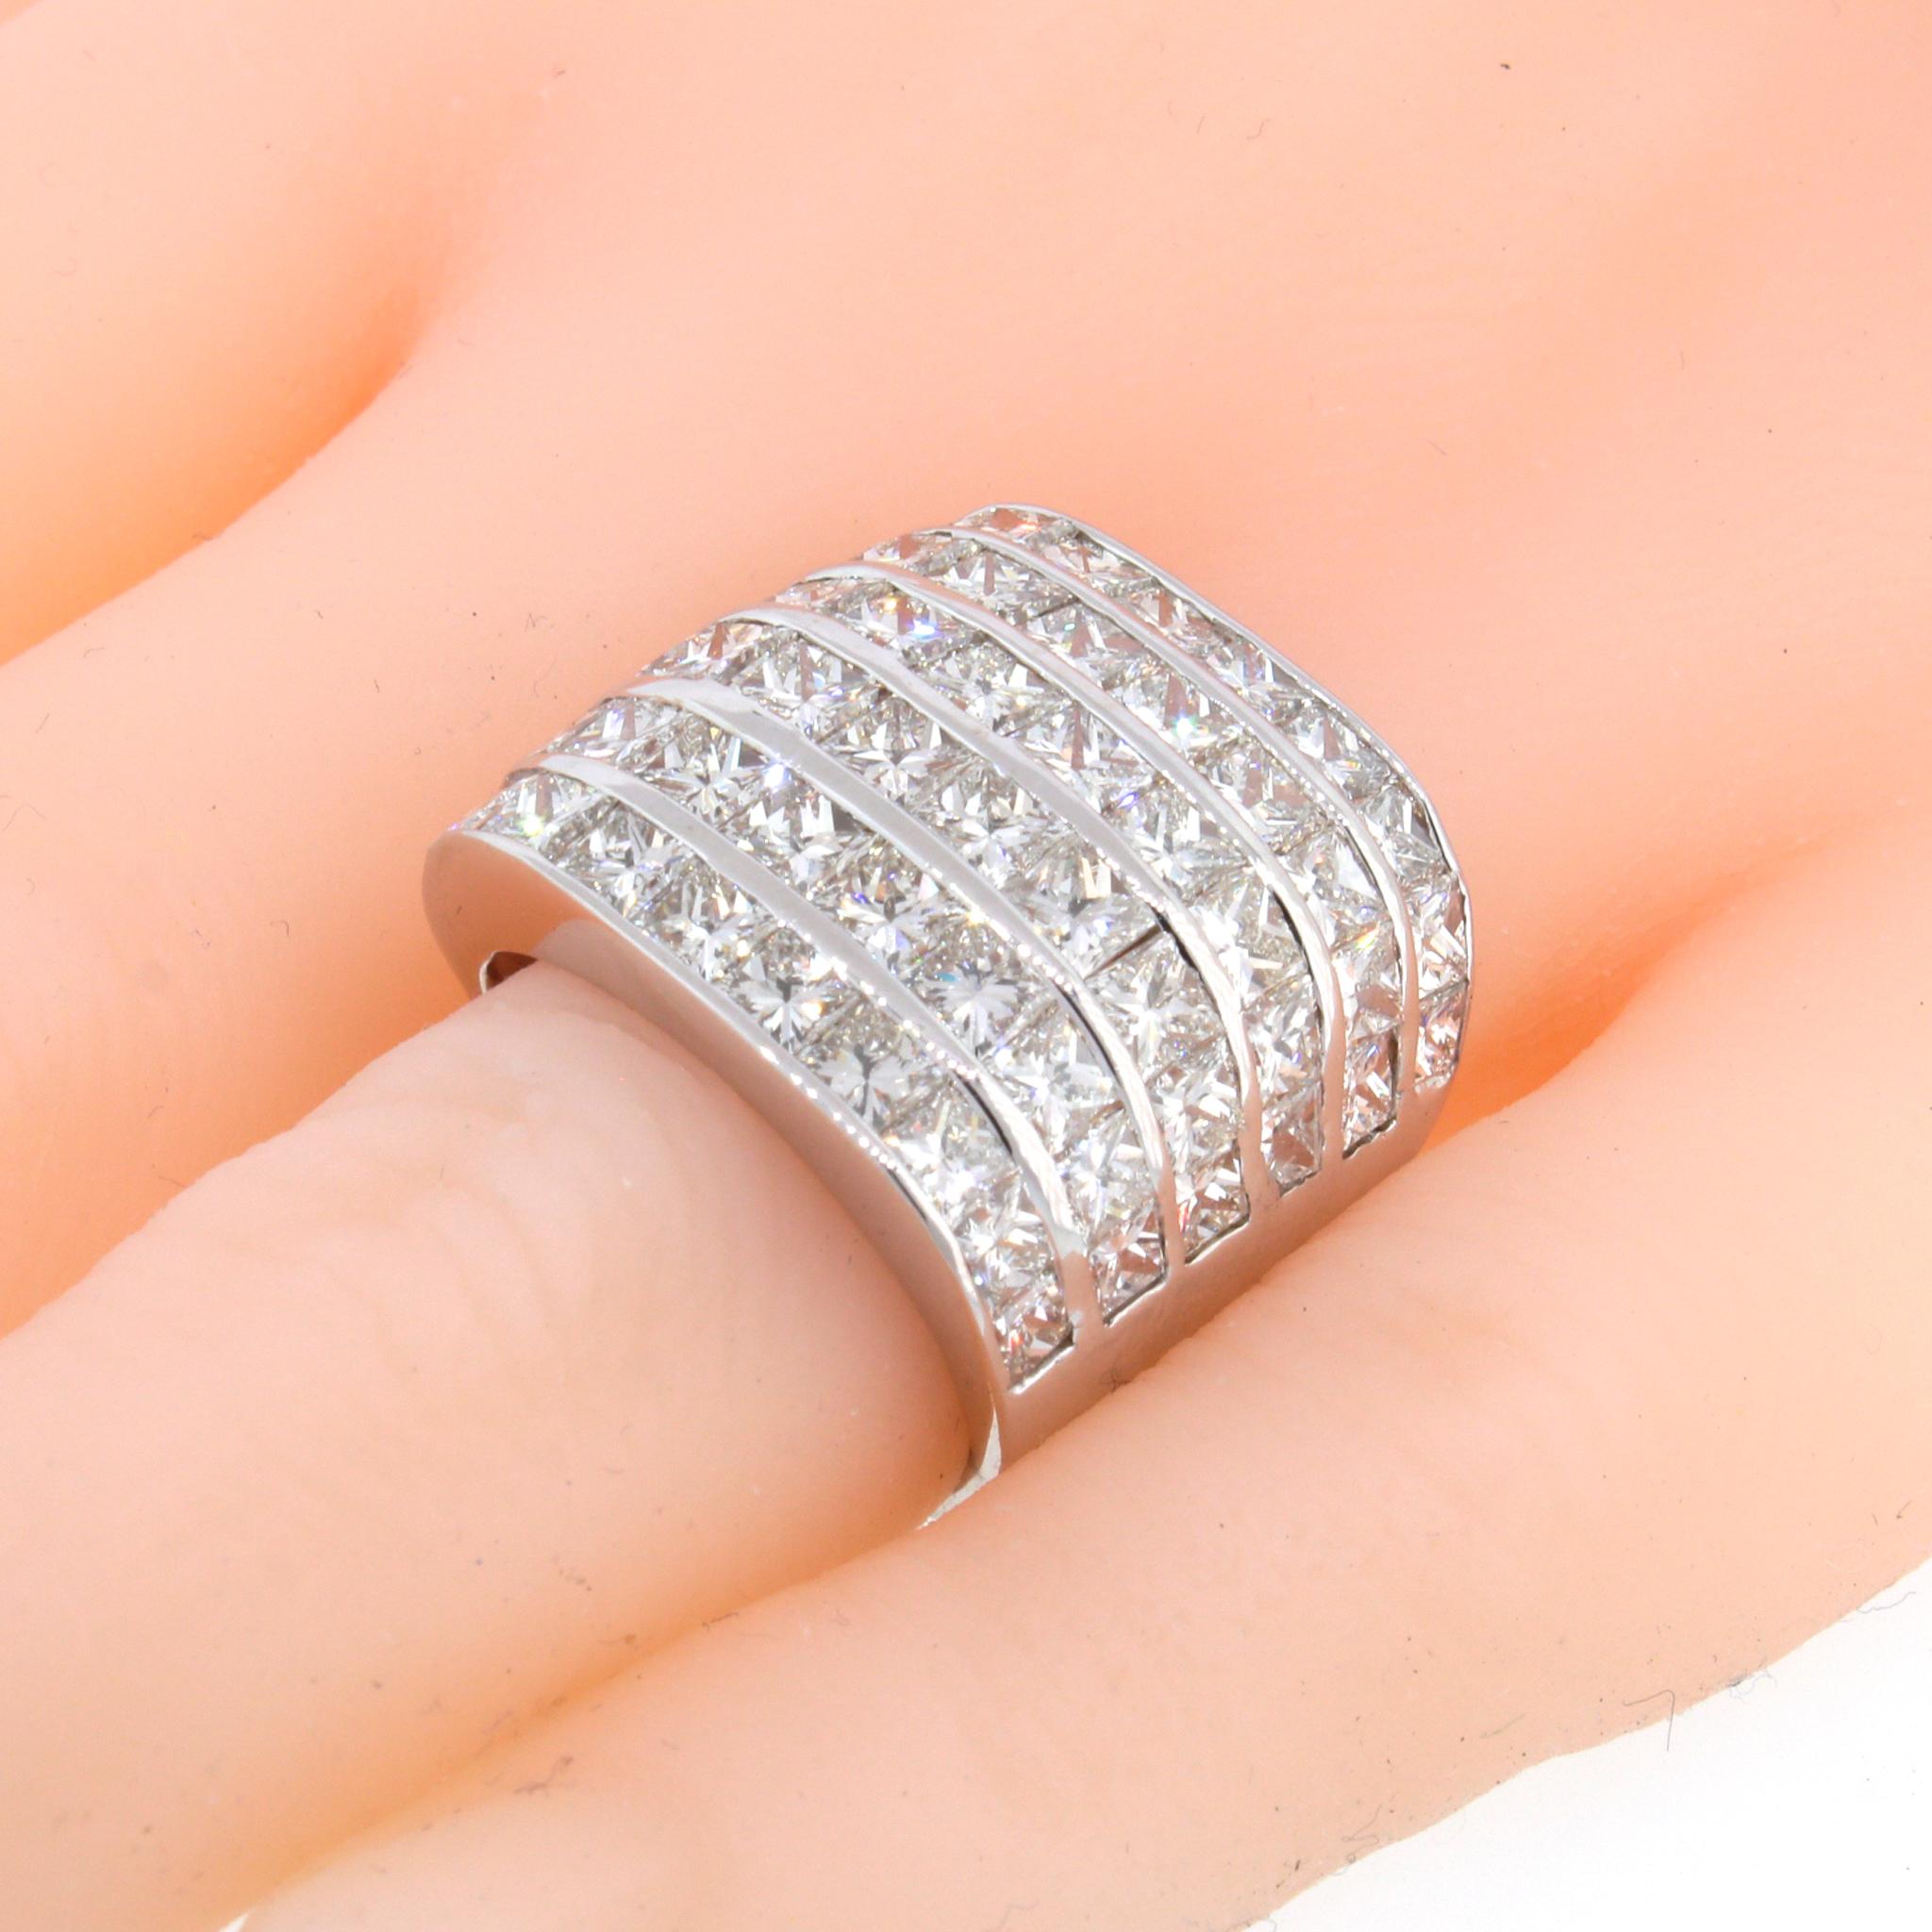 18 kt White Gold
Diamond: 6 ct twd (estimated)
Huge Diamond Look
Ring Size: 5
Total Weight: 15.9 grams